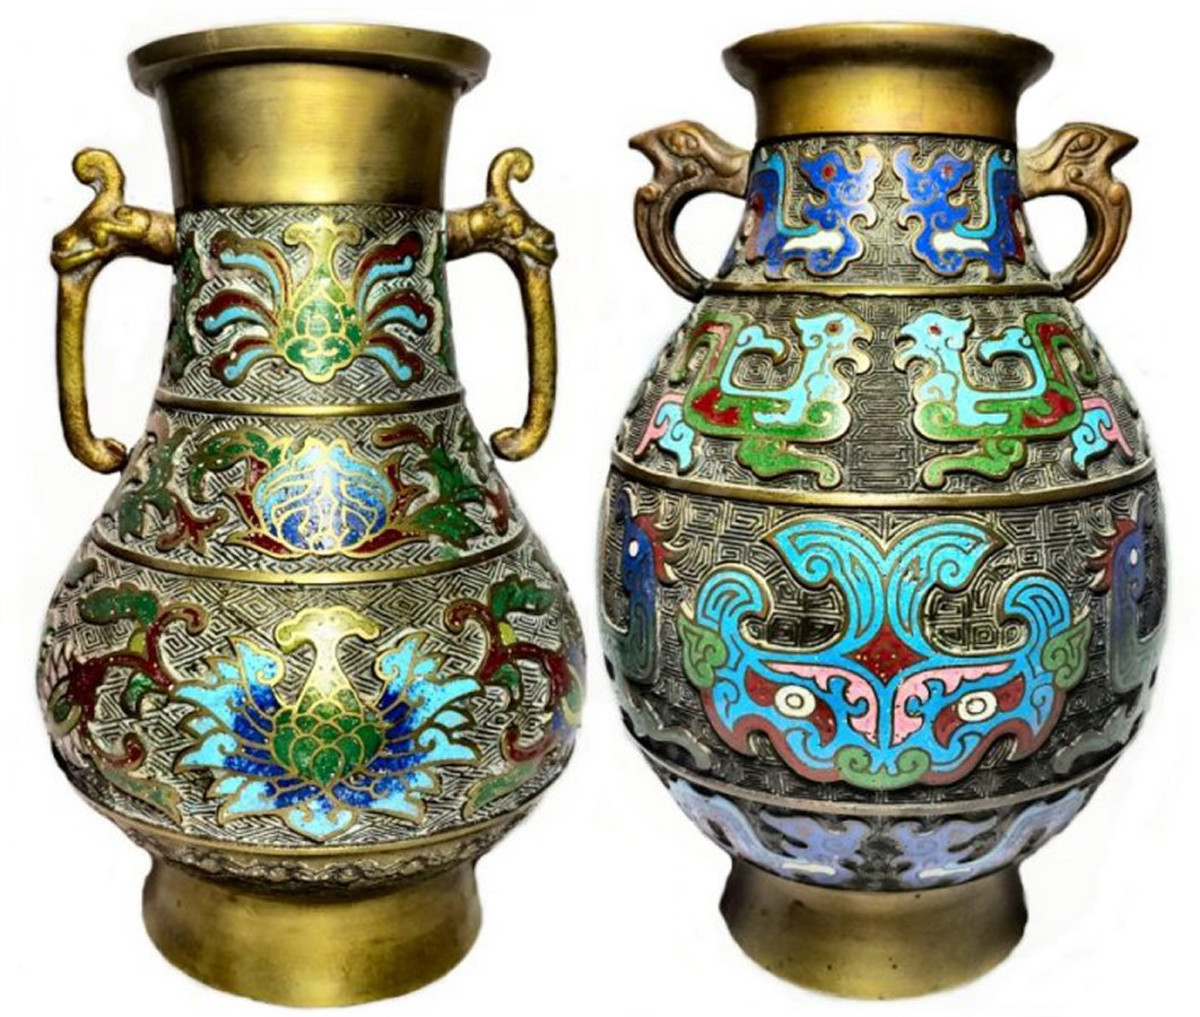 How are the different types of cloisonne different?